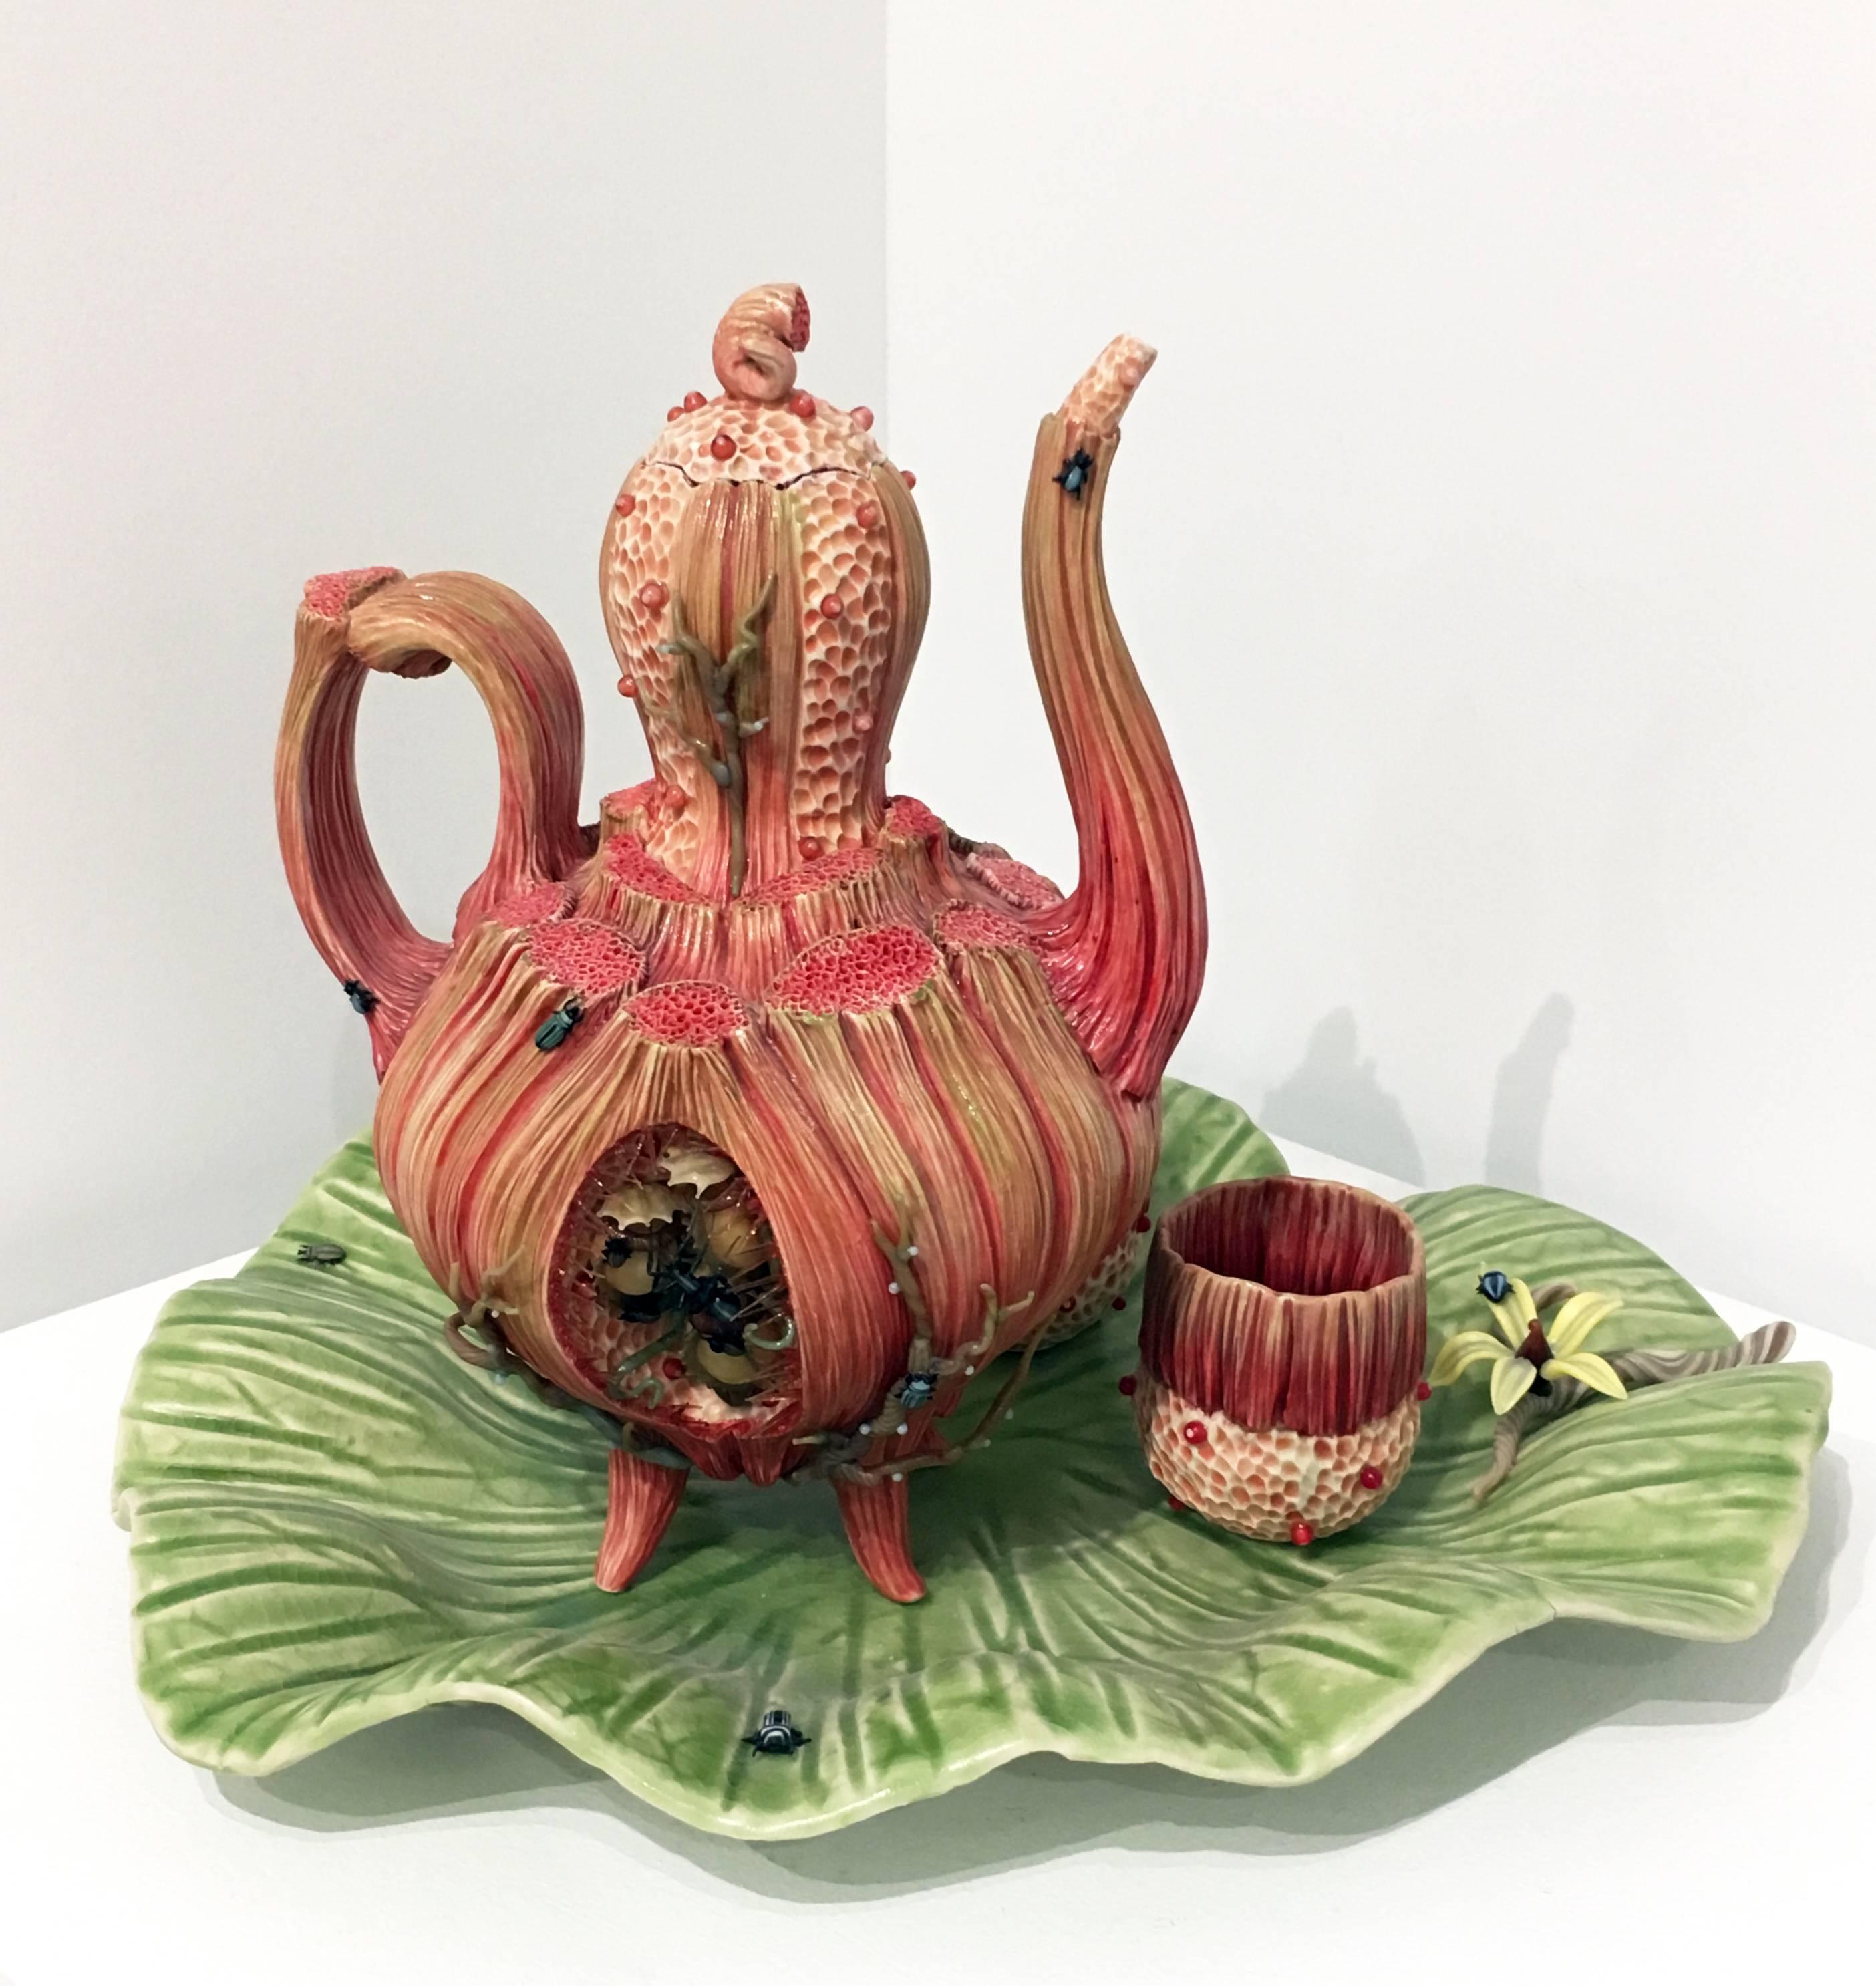 Bonnie Seeman grew up in Miami, Florida with a propensity towards anatomy illustration and the dazzling colors and rich foliage of the Miami landscape.  Developing her technique with porcelain and glass, Seeman channeled this inspiration; the